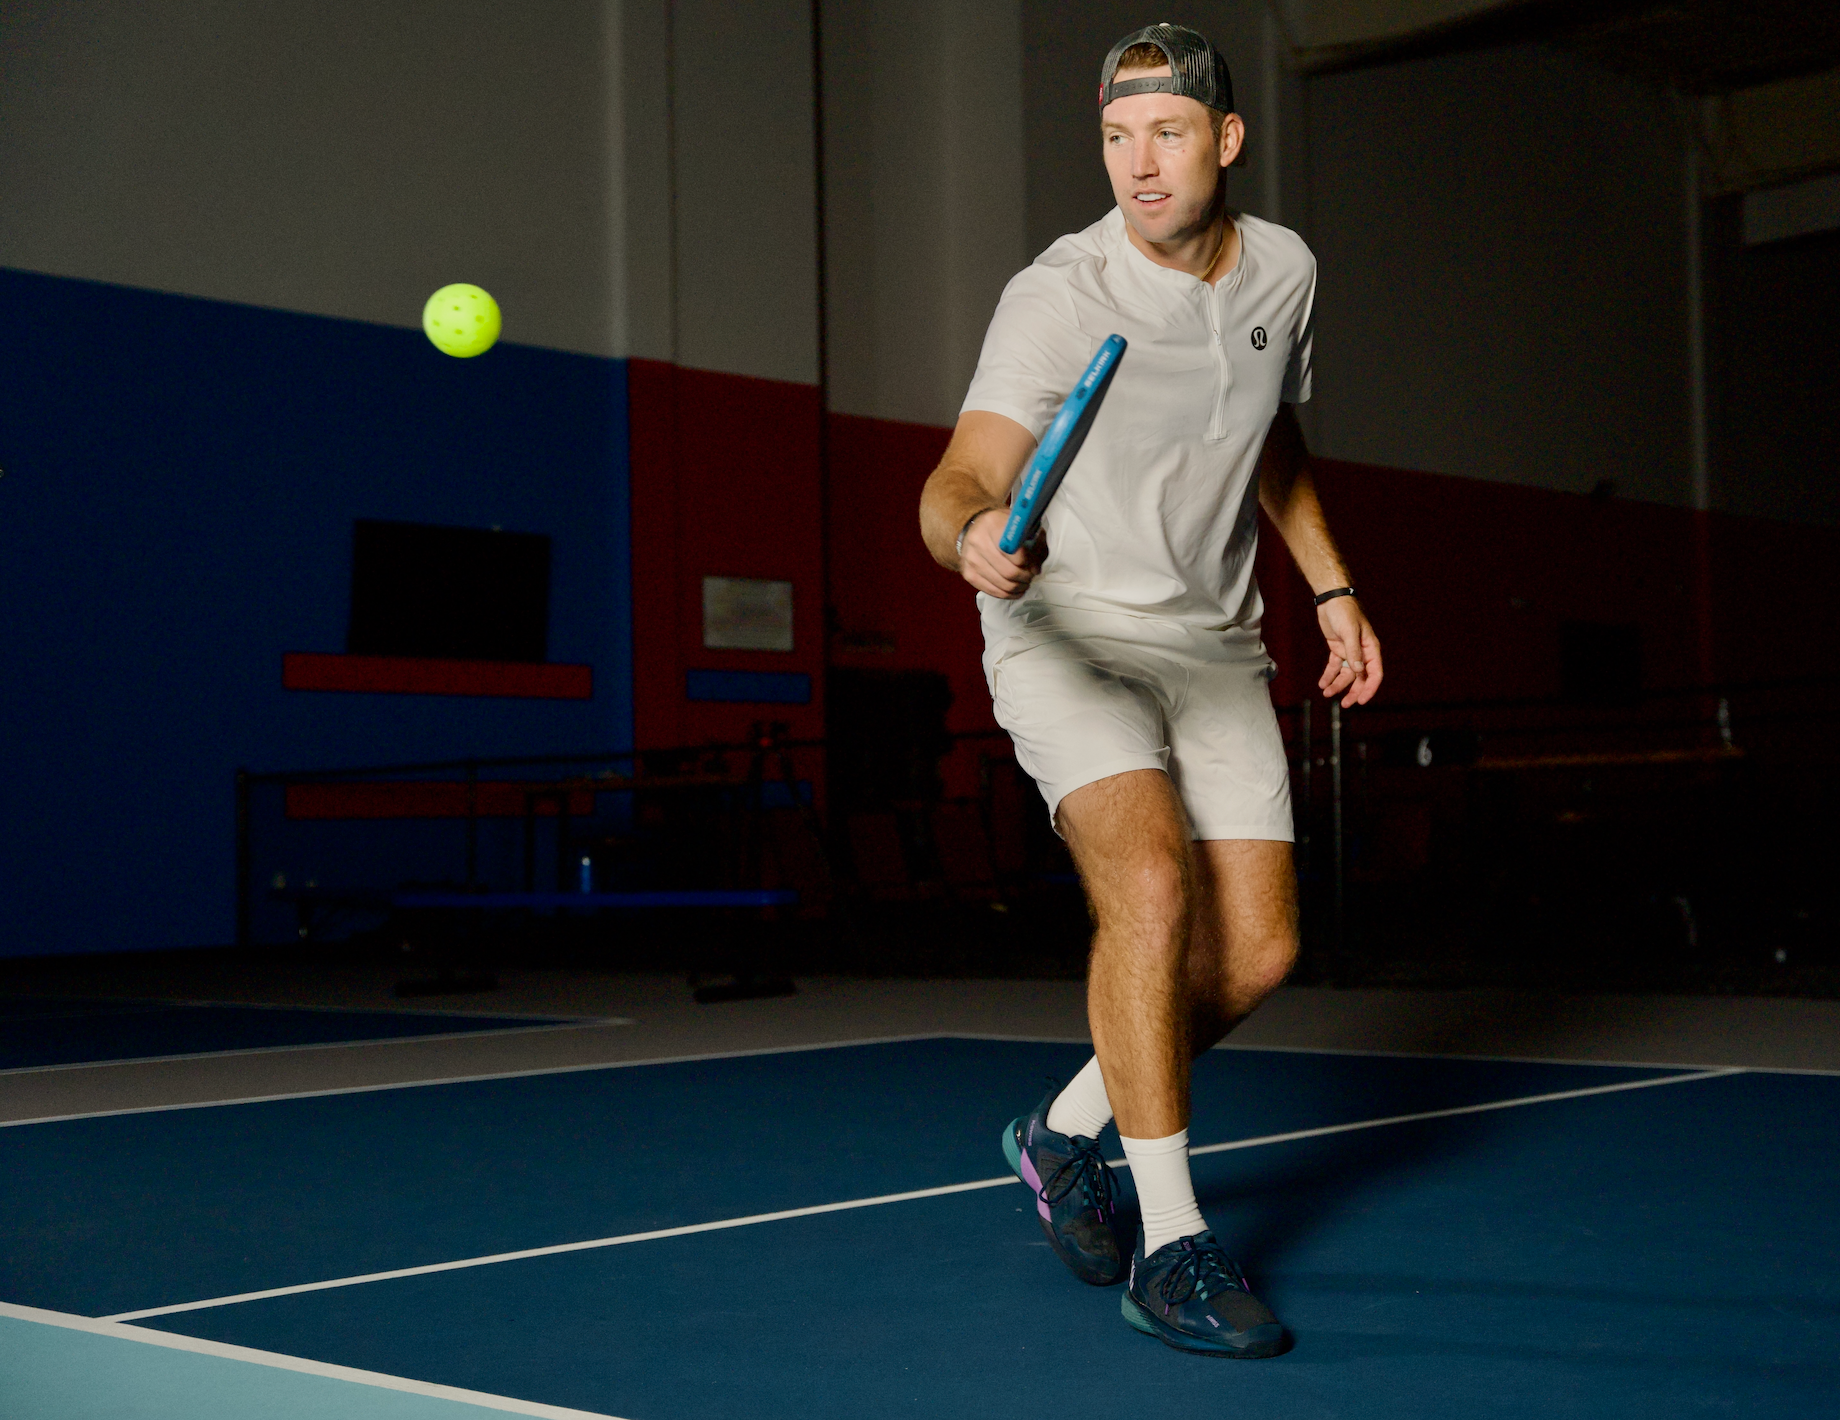 Jack Sock’s pickleball play style: How his tennis skills will translate to the game